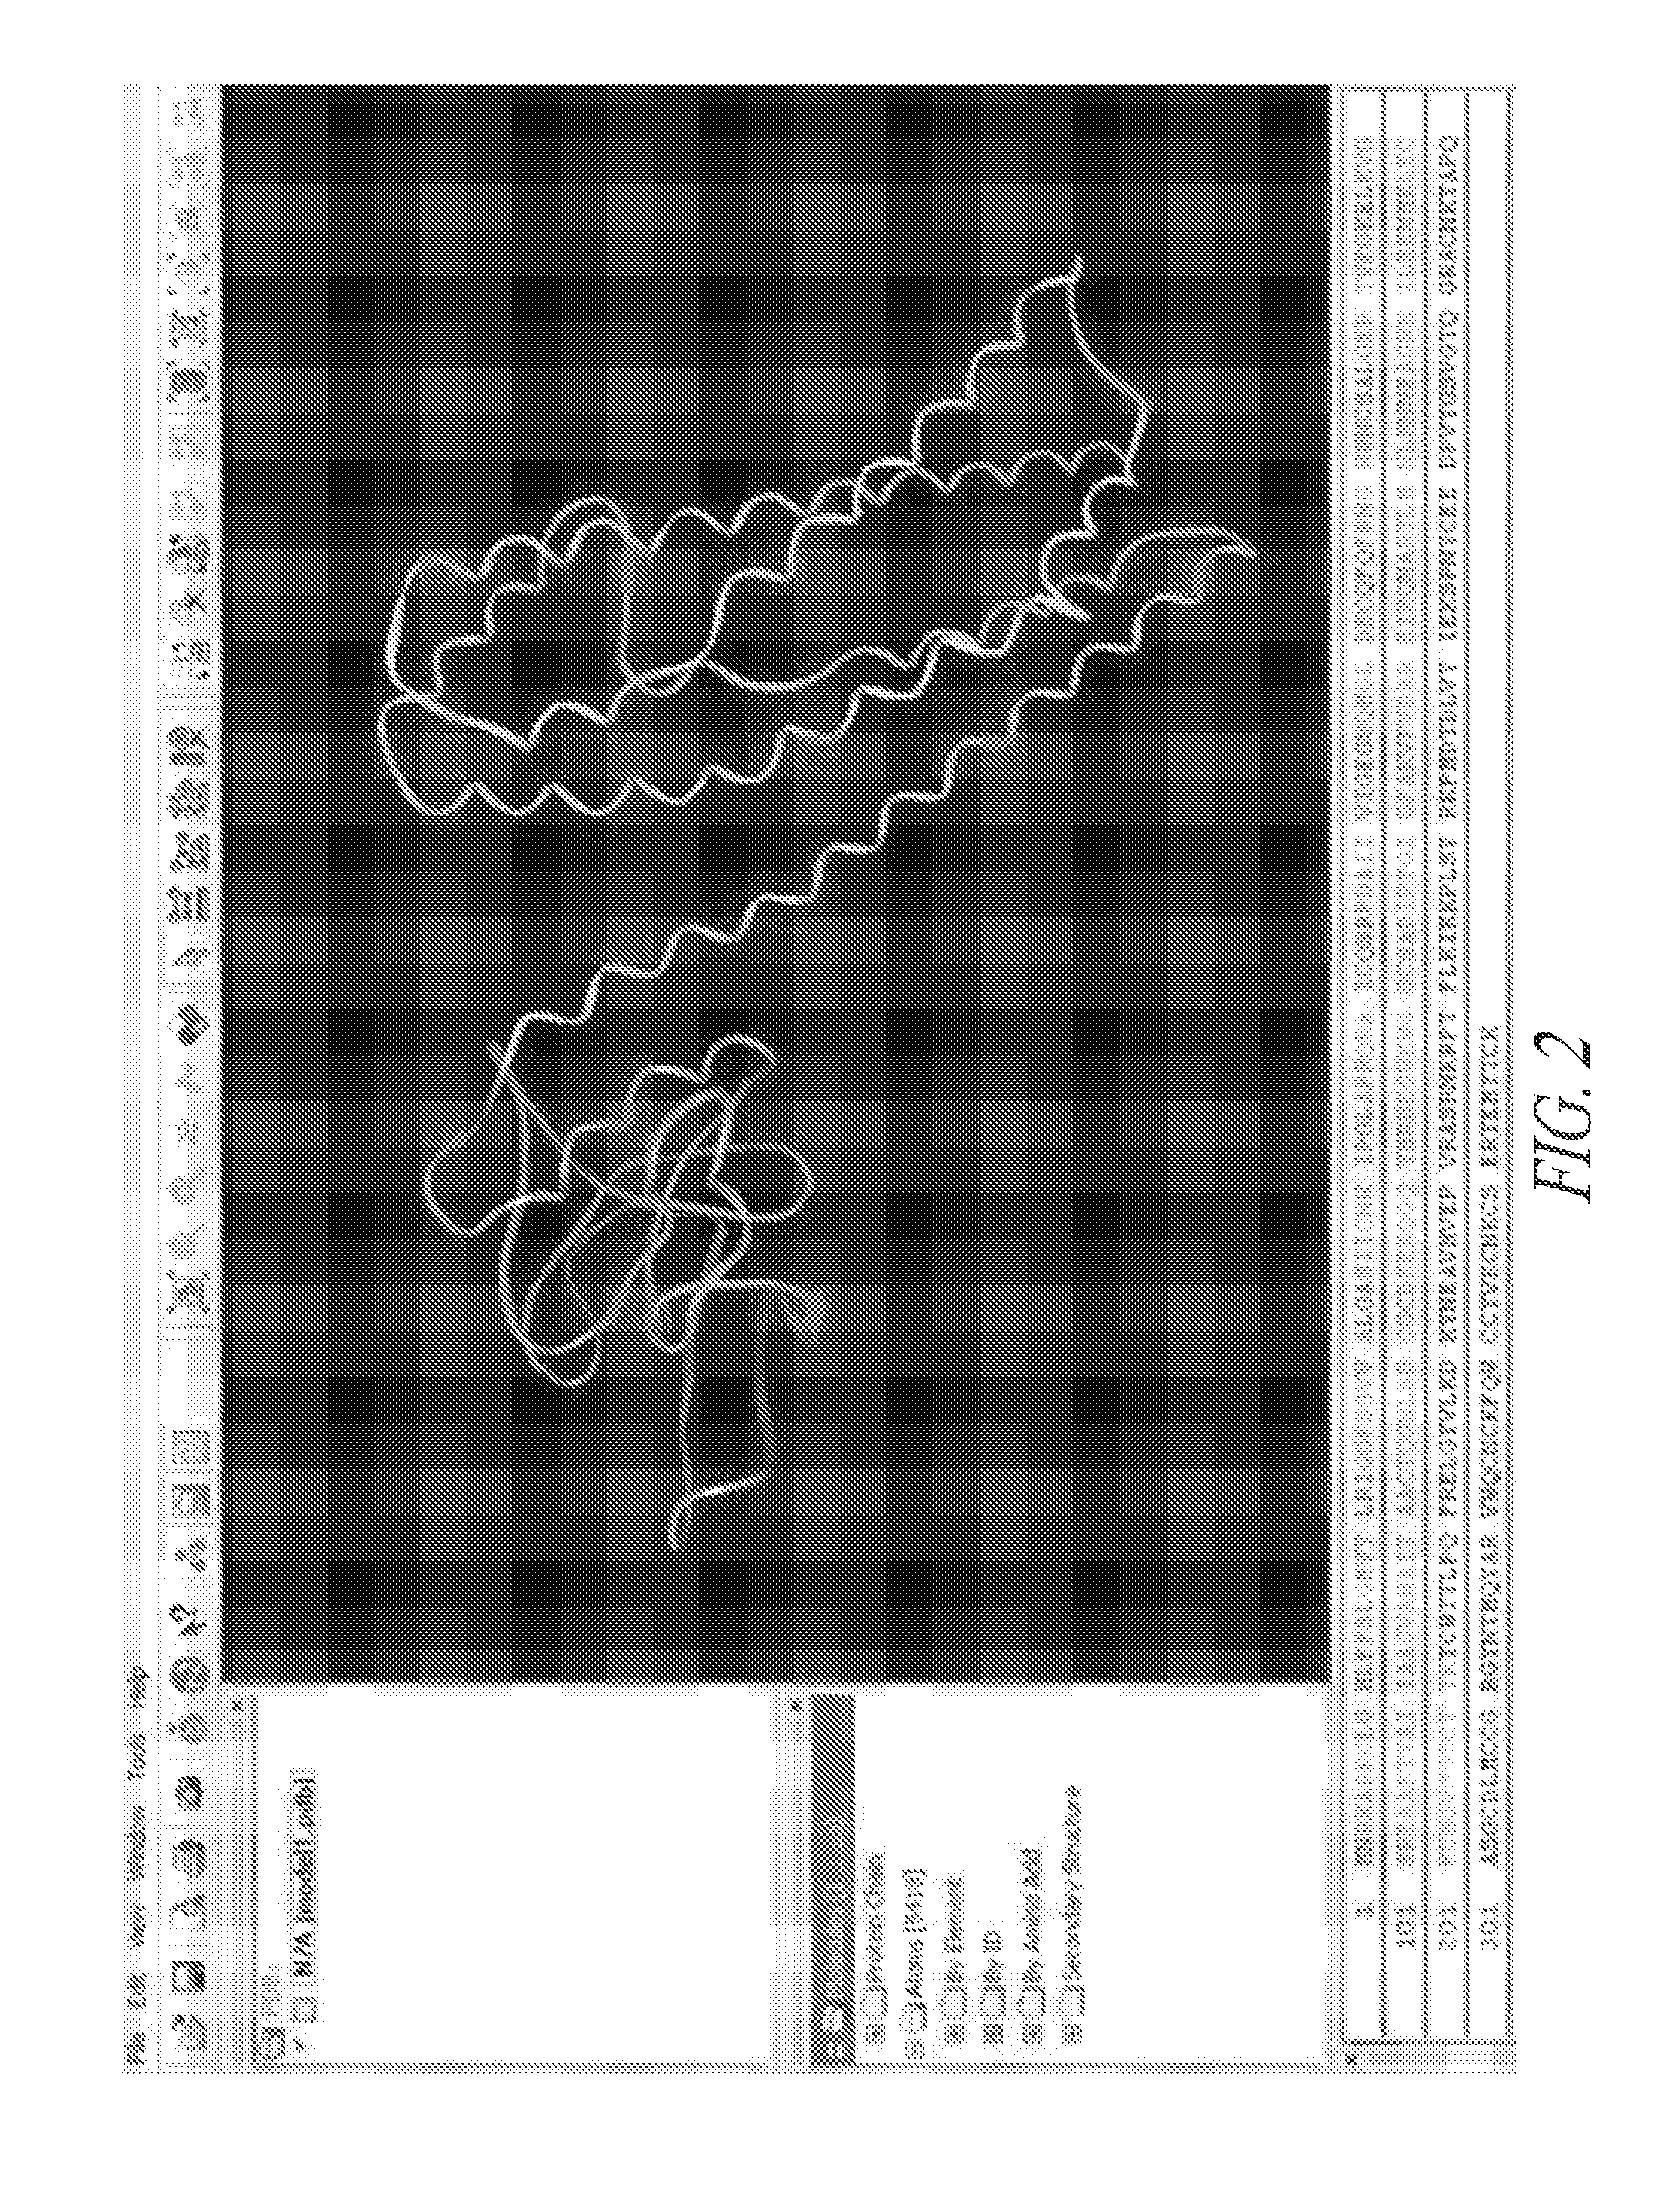 Wnt7a compositions and method of using the same